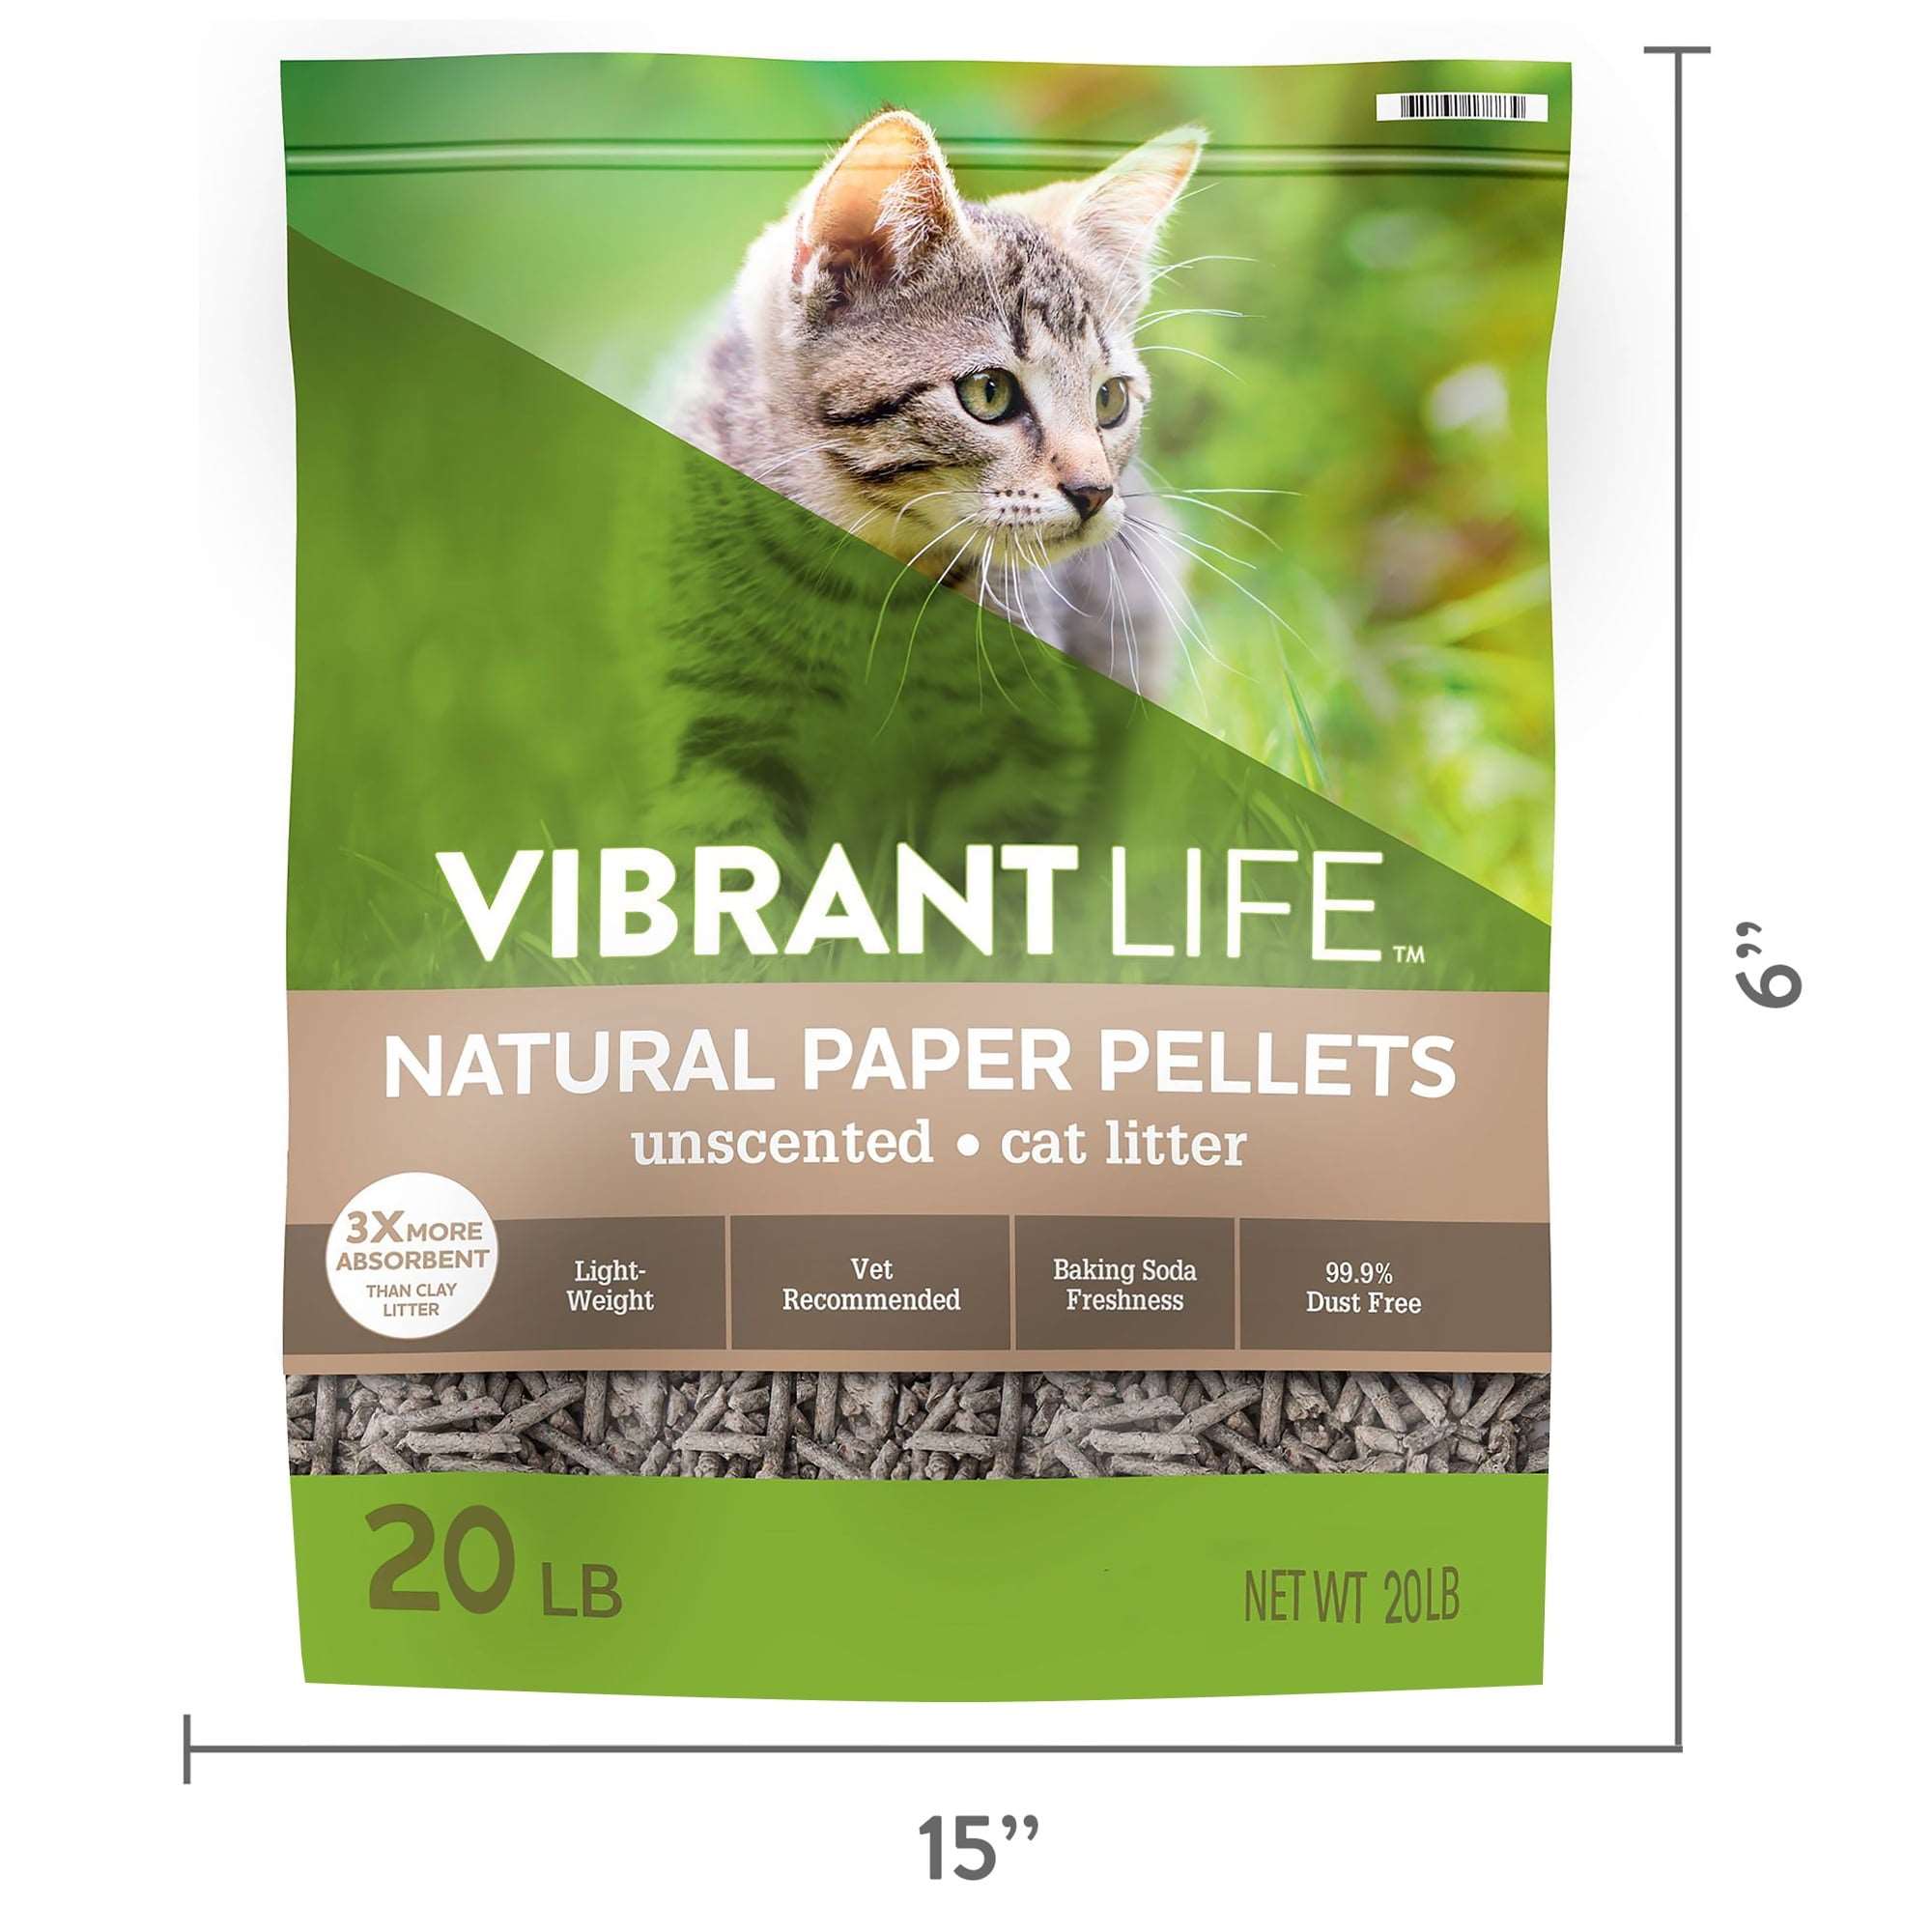 Wholesale prices with free shipping all over United States (2 pack) Vibrant Life Natural Paper Pellets Cat Litter, Unscented, 20 lb - Steven Deals